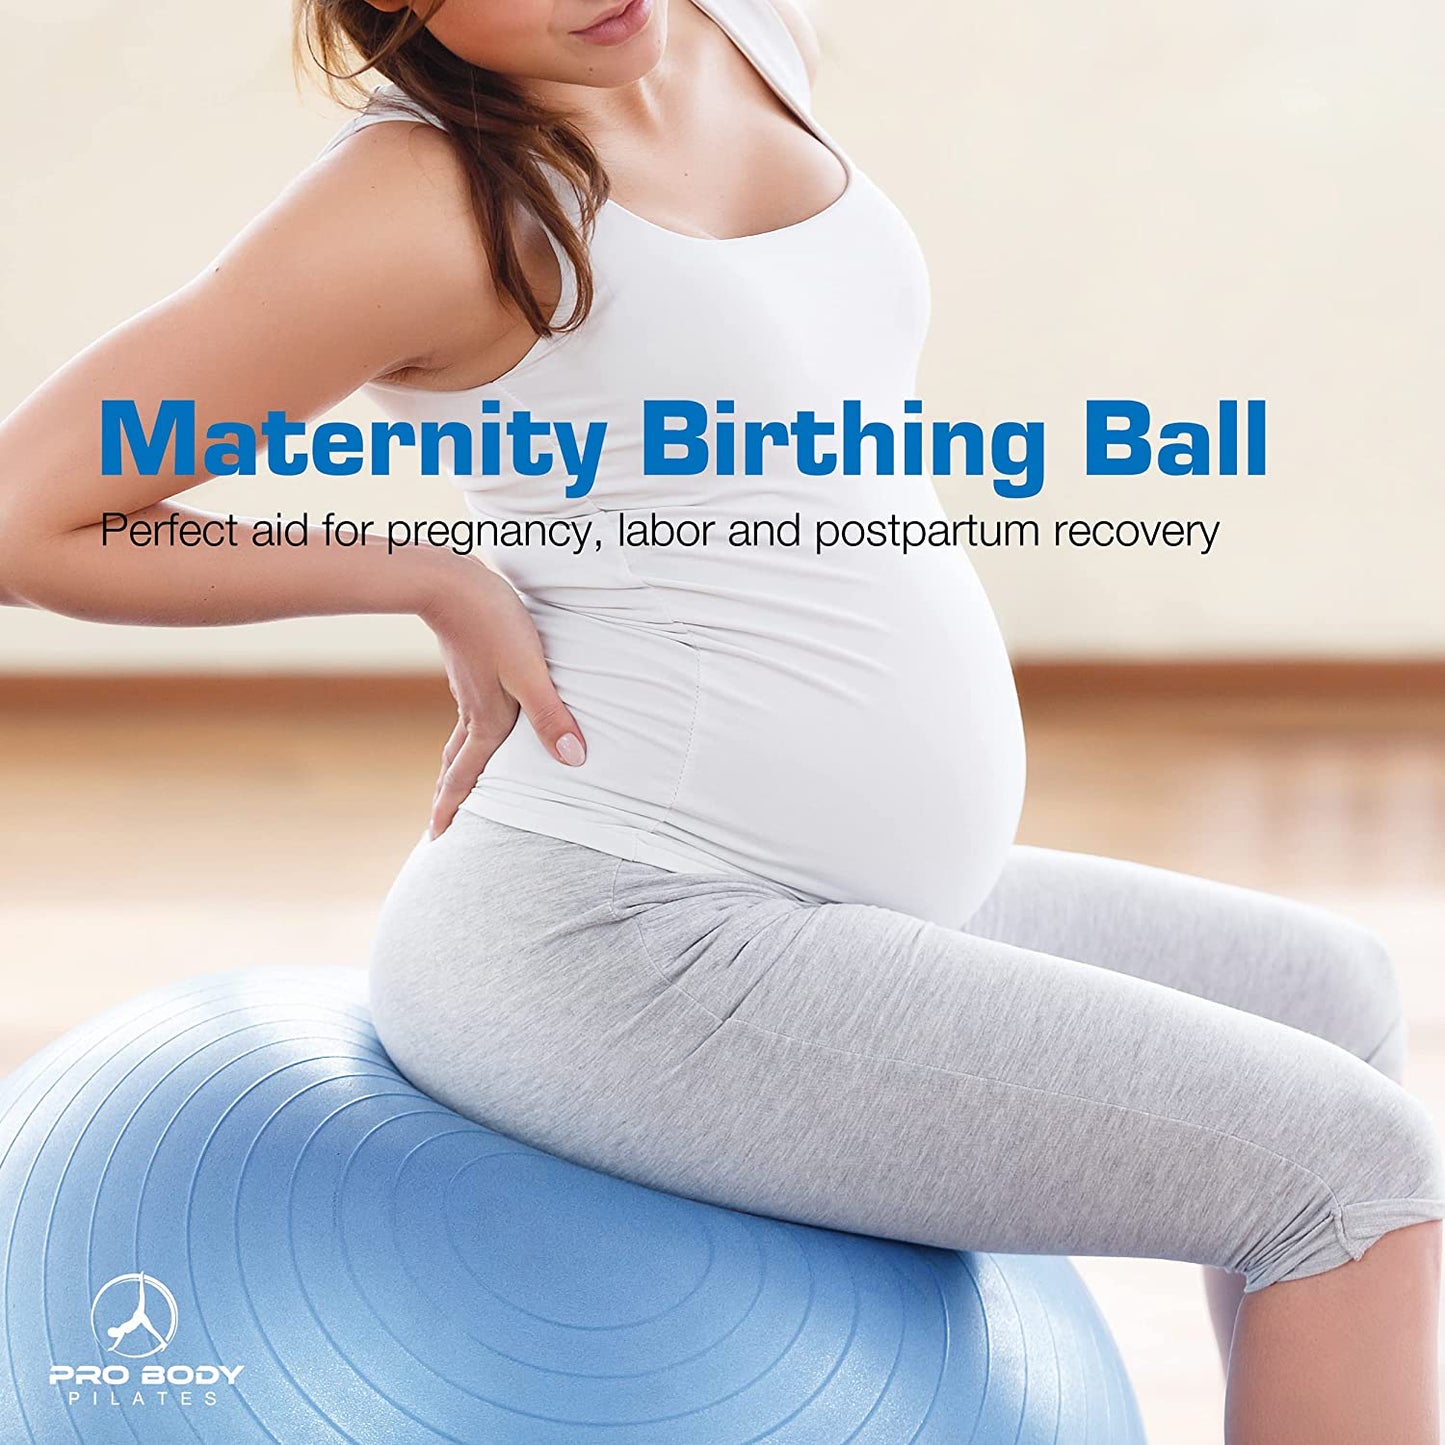 Ball Yoga Ball Exercise Ball, Fresh Colors Balance Ball or Pregnancy Ball for Stability, as a Yoga Ball Chair, Therapy Ball Workout Ball or Birthing Ball for Pregnancy